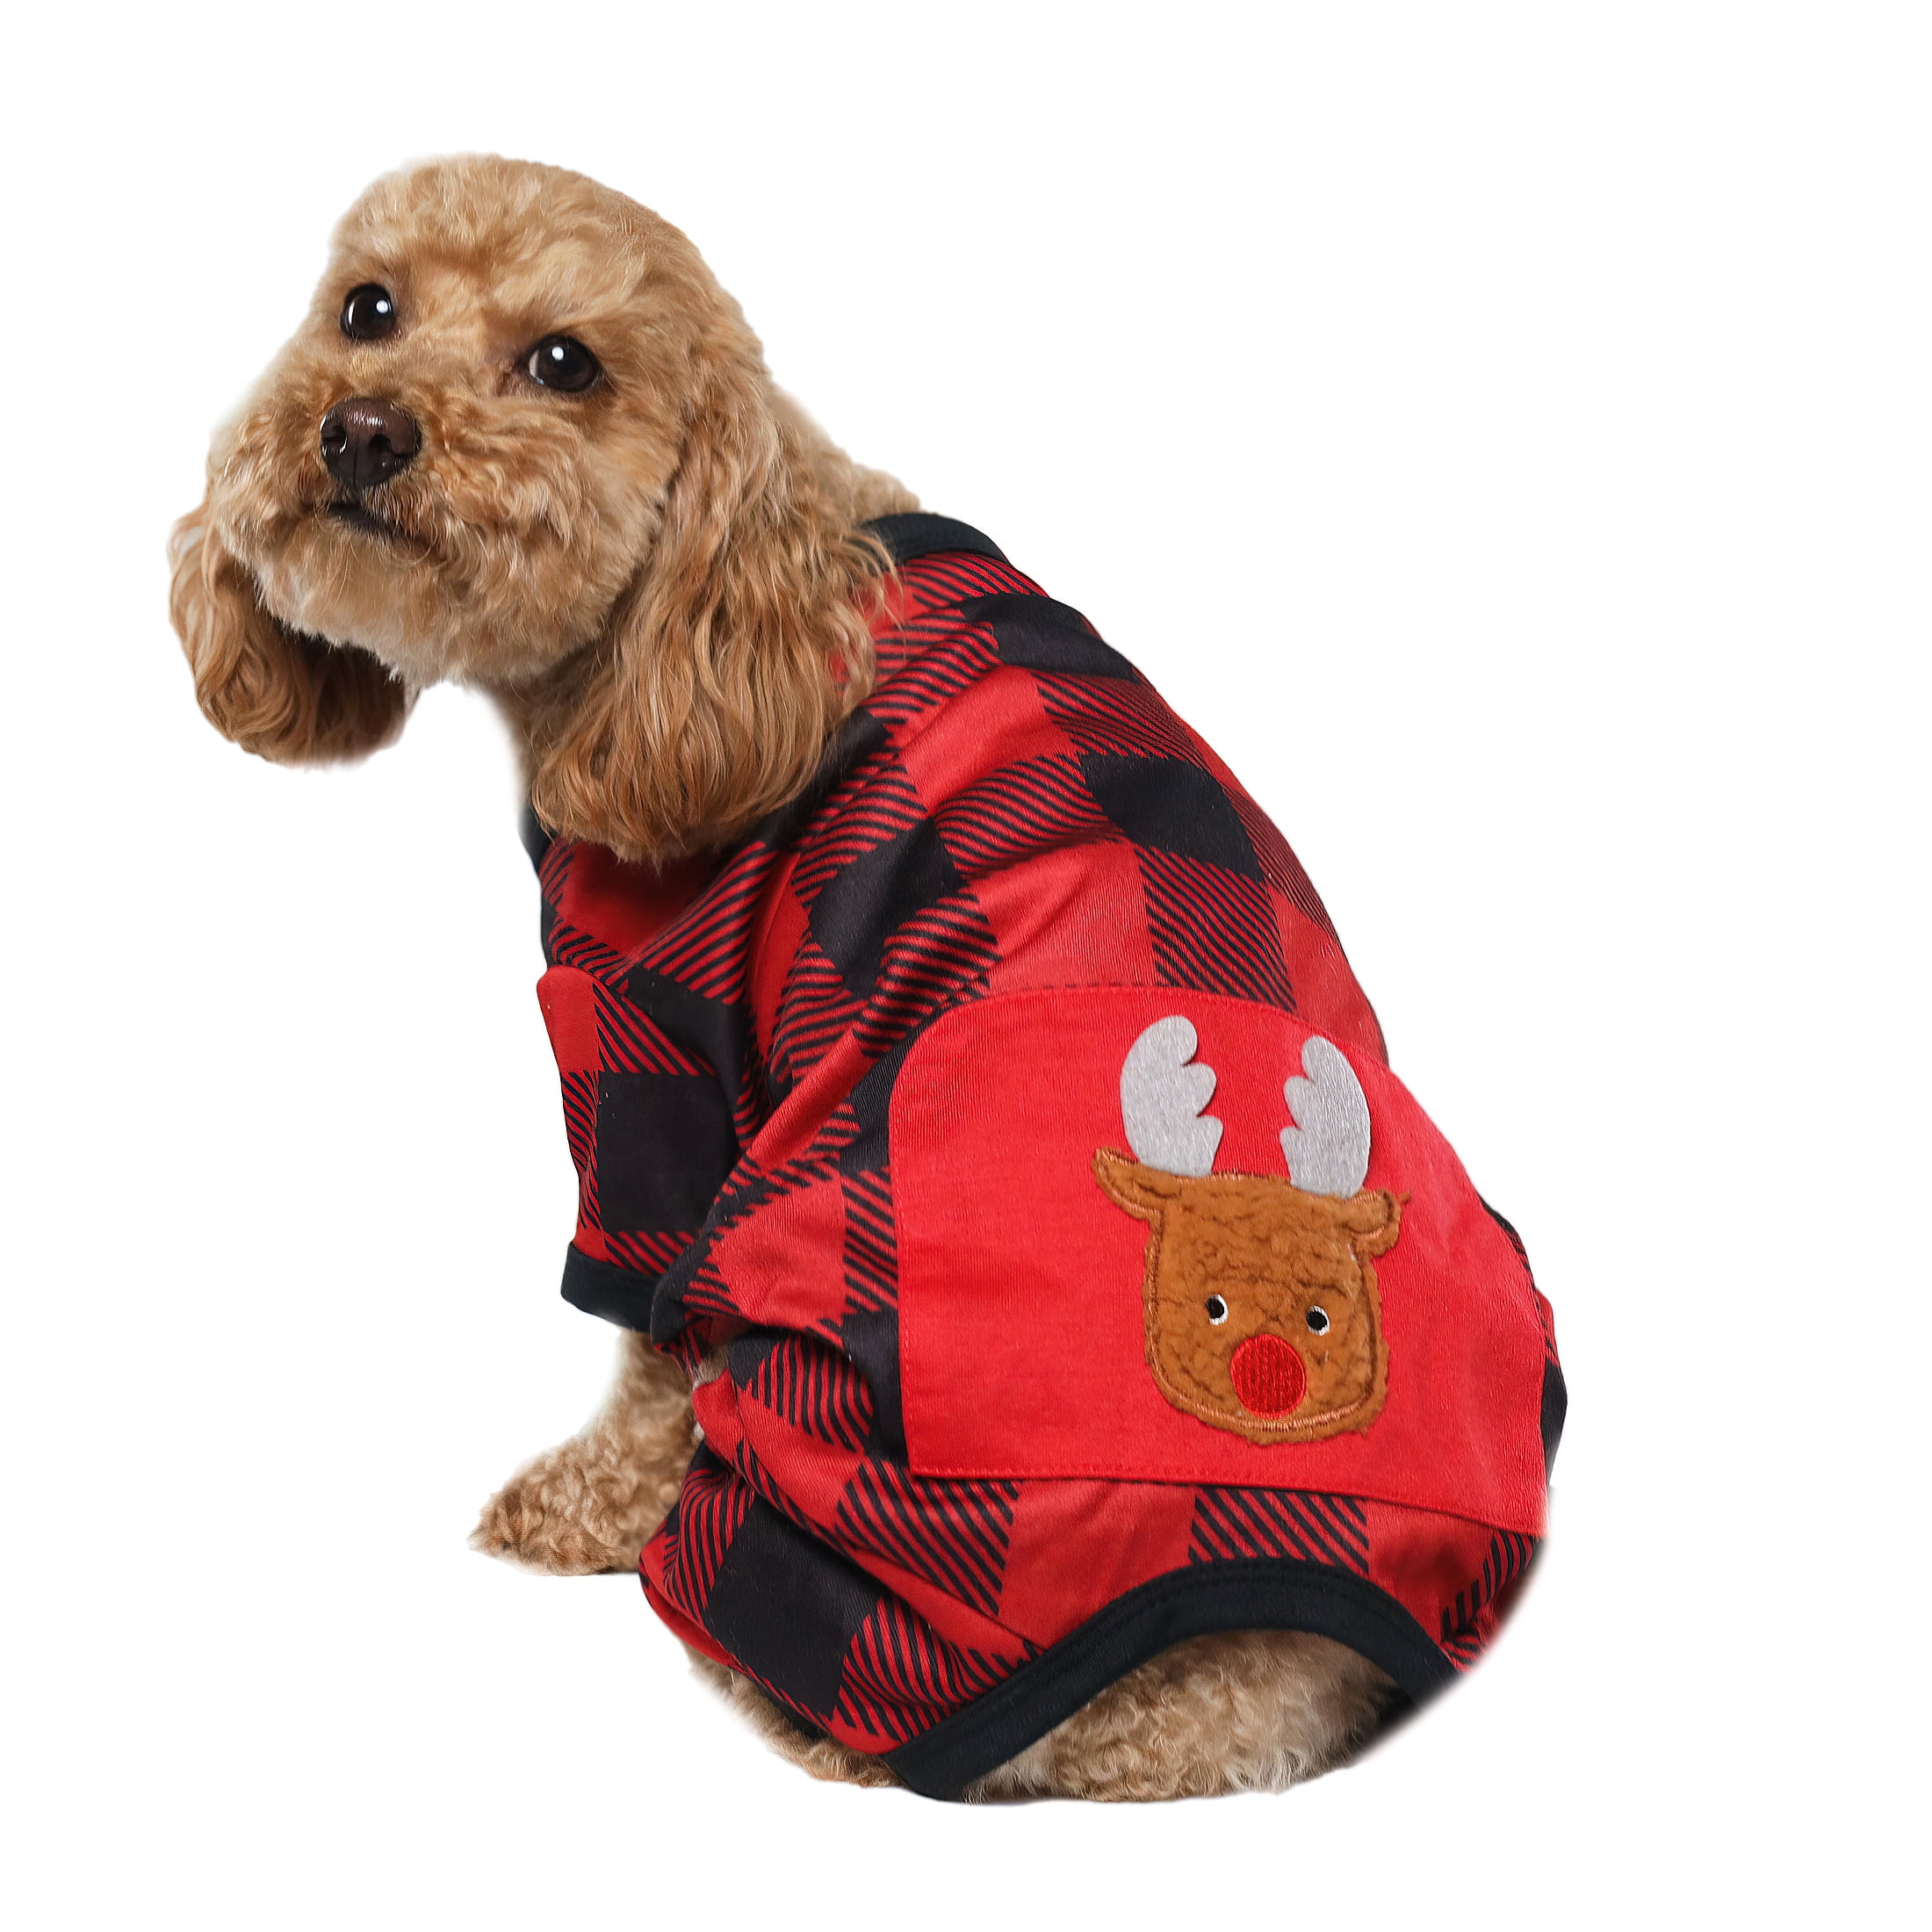 Vibrant Life Dog Clothes: Red & Black Plaid Jersey Pajamas for Dogs, Size  XS 